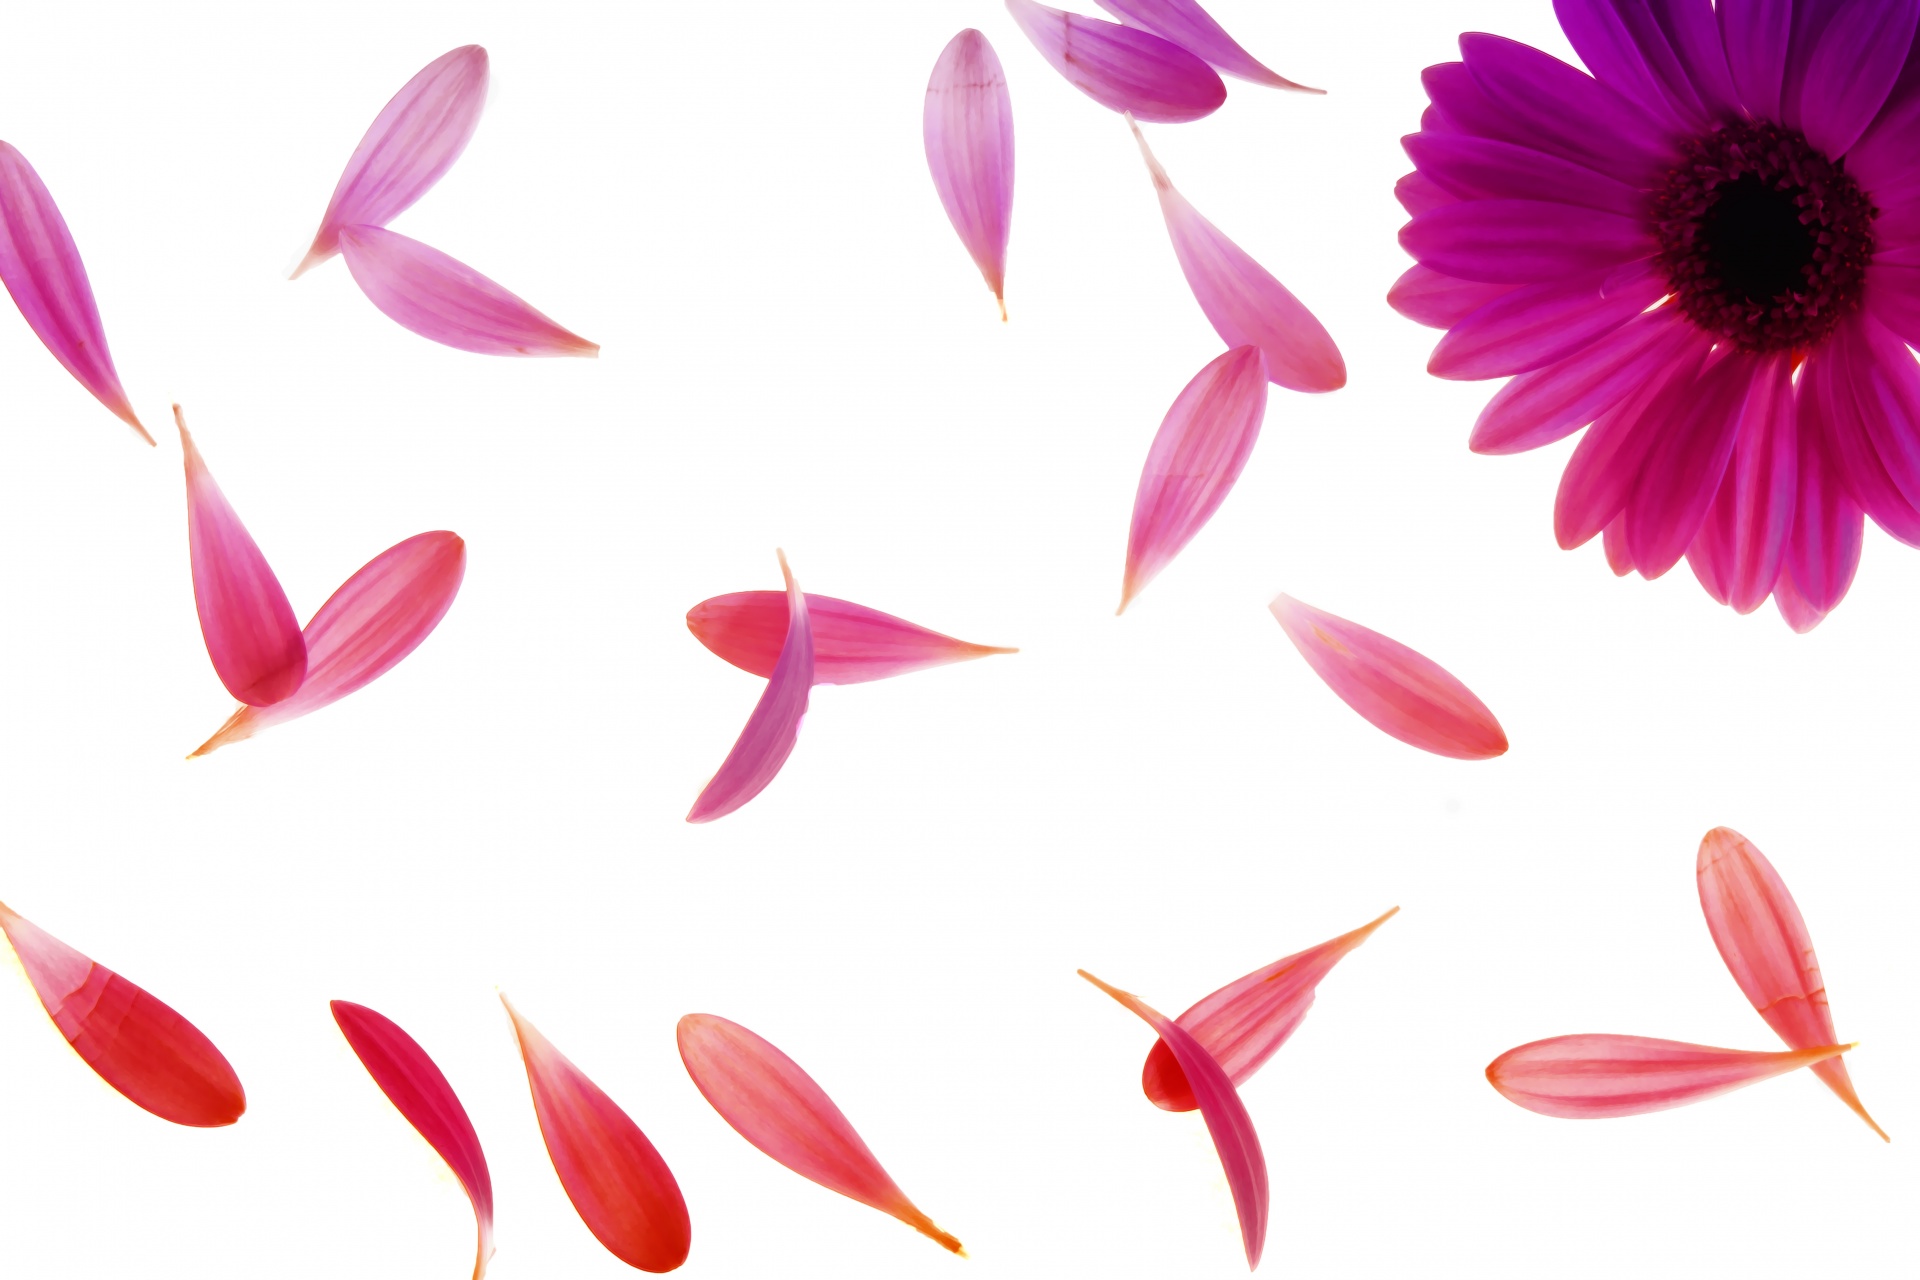 Pink and purple falling petals.